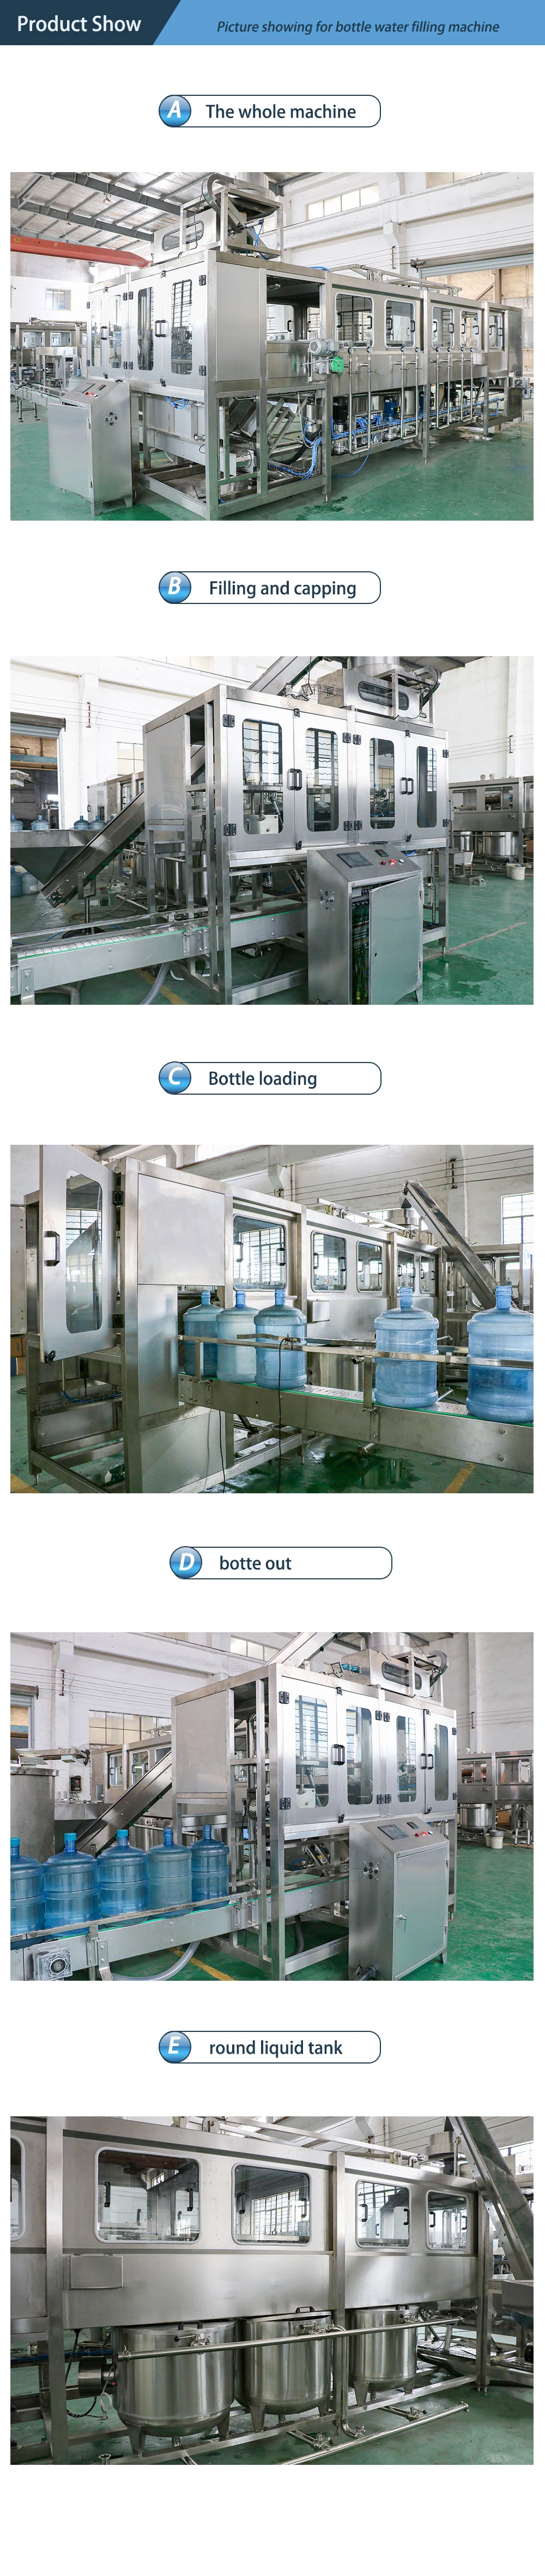 Automatic Filling and Capping Machine for 5gallon